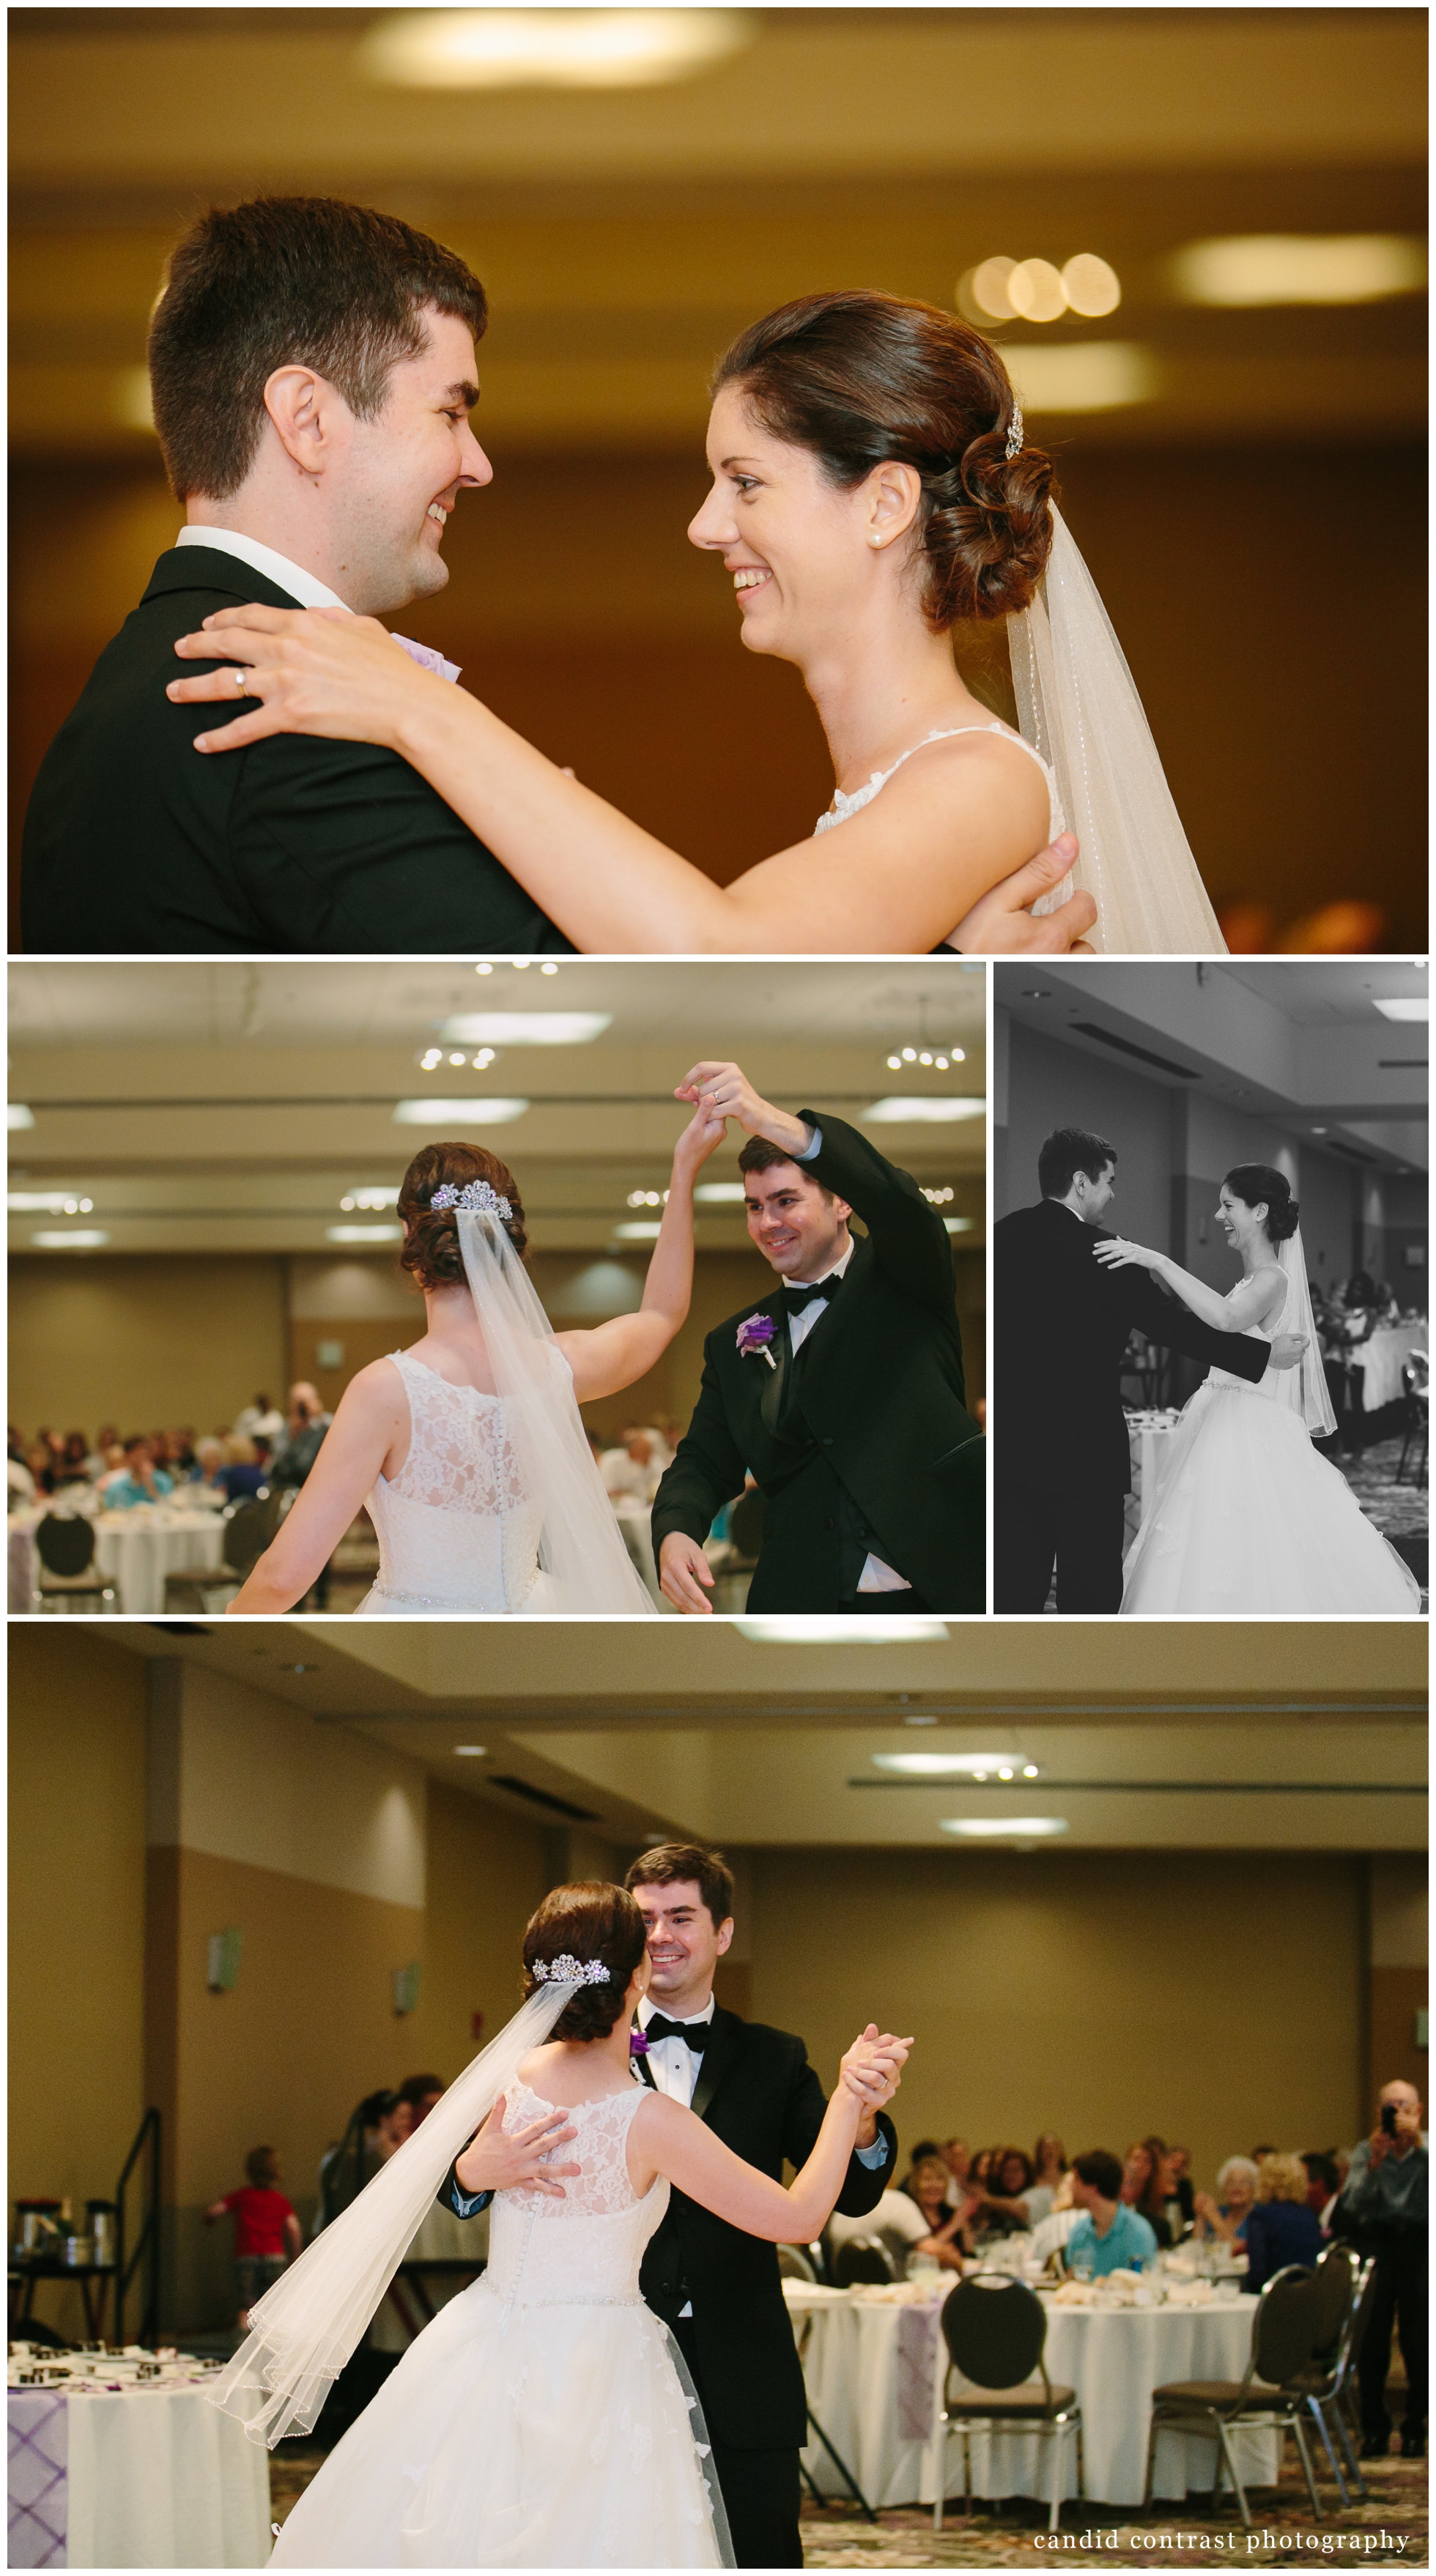 first dance at classic Dubuque iowa wedding at the grand river center, candid contrast photography